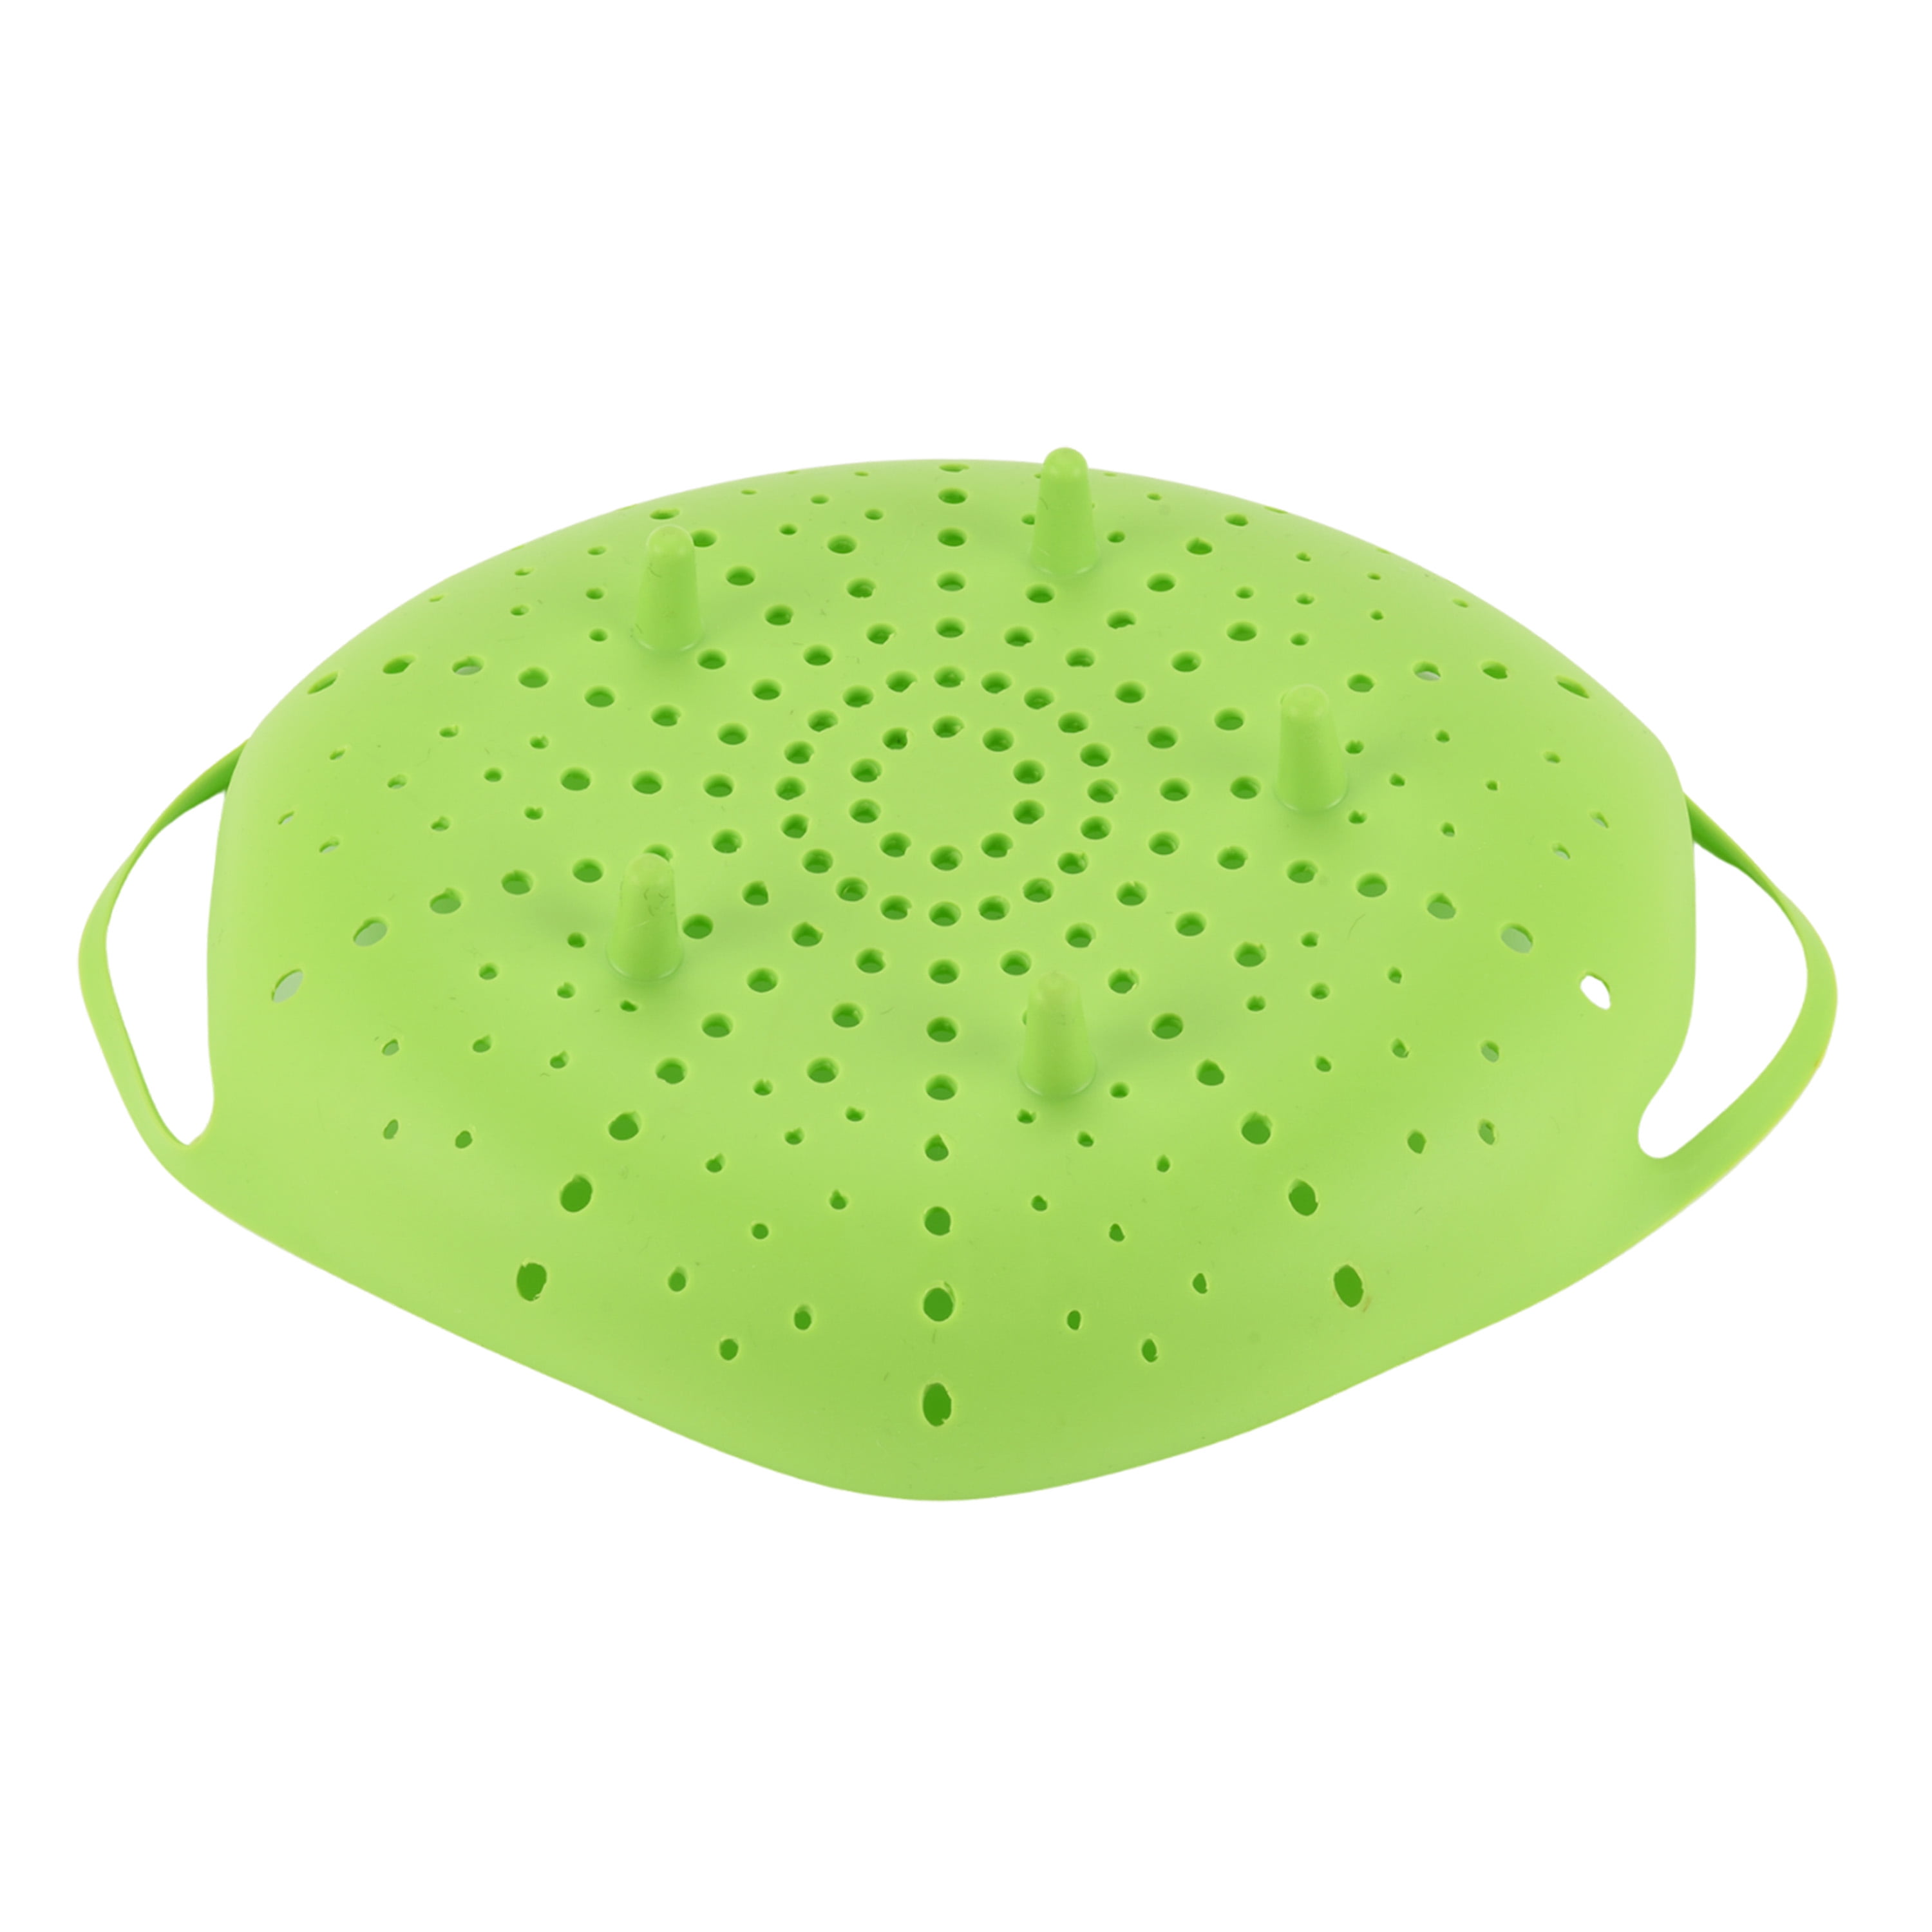 Instant Pot Green Silicone Steamer Basket with Interlocking Handles - Power  Townsend Company